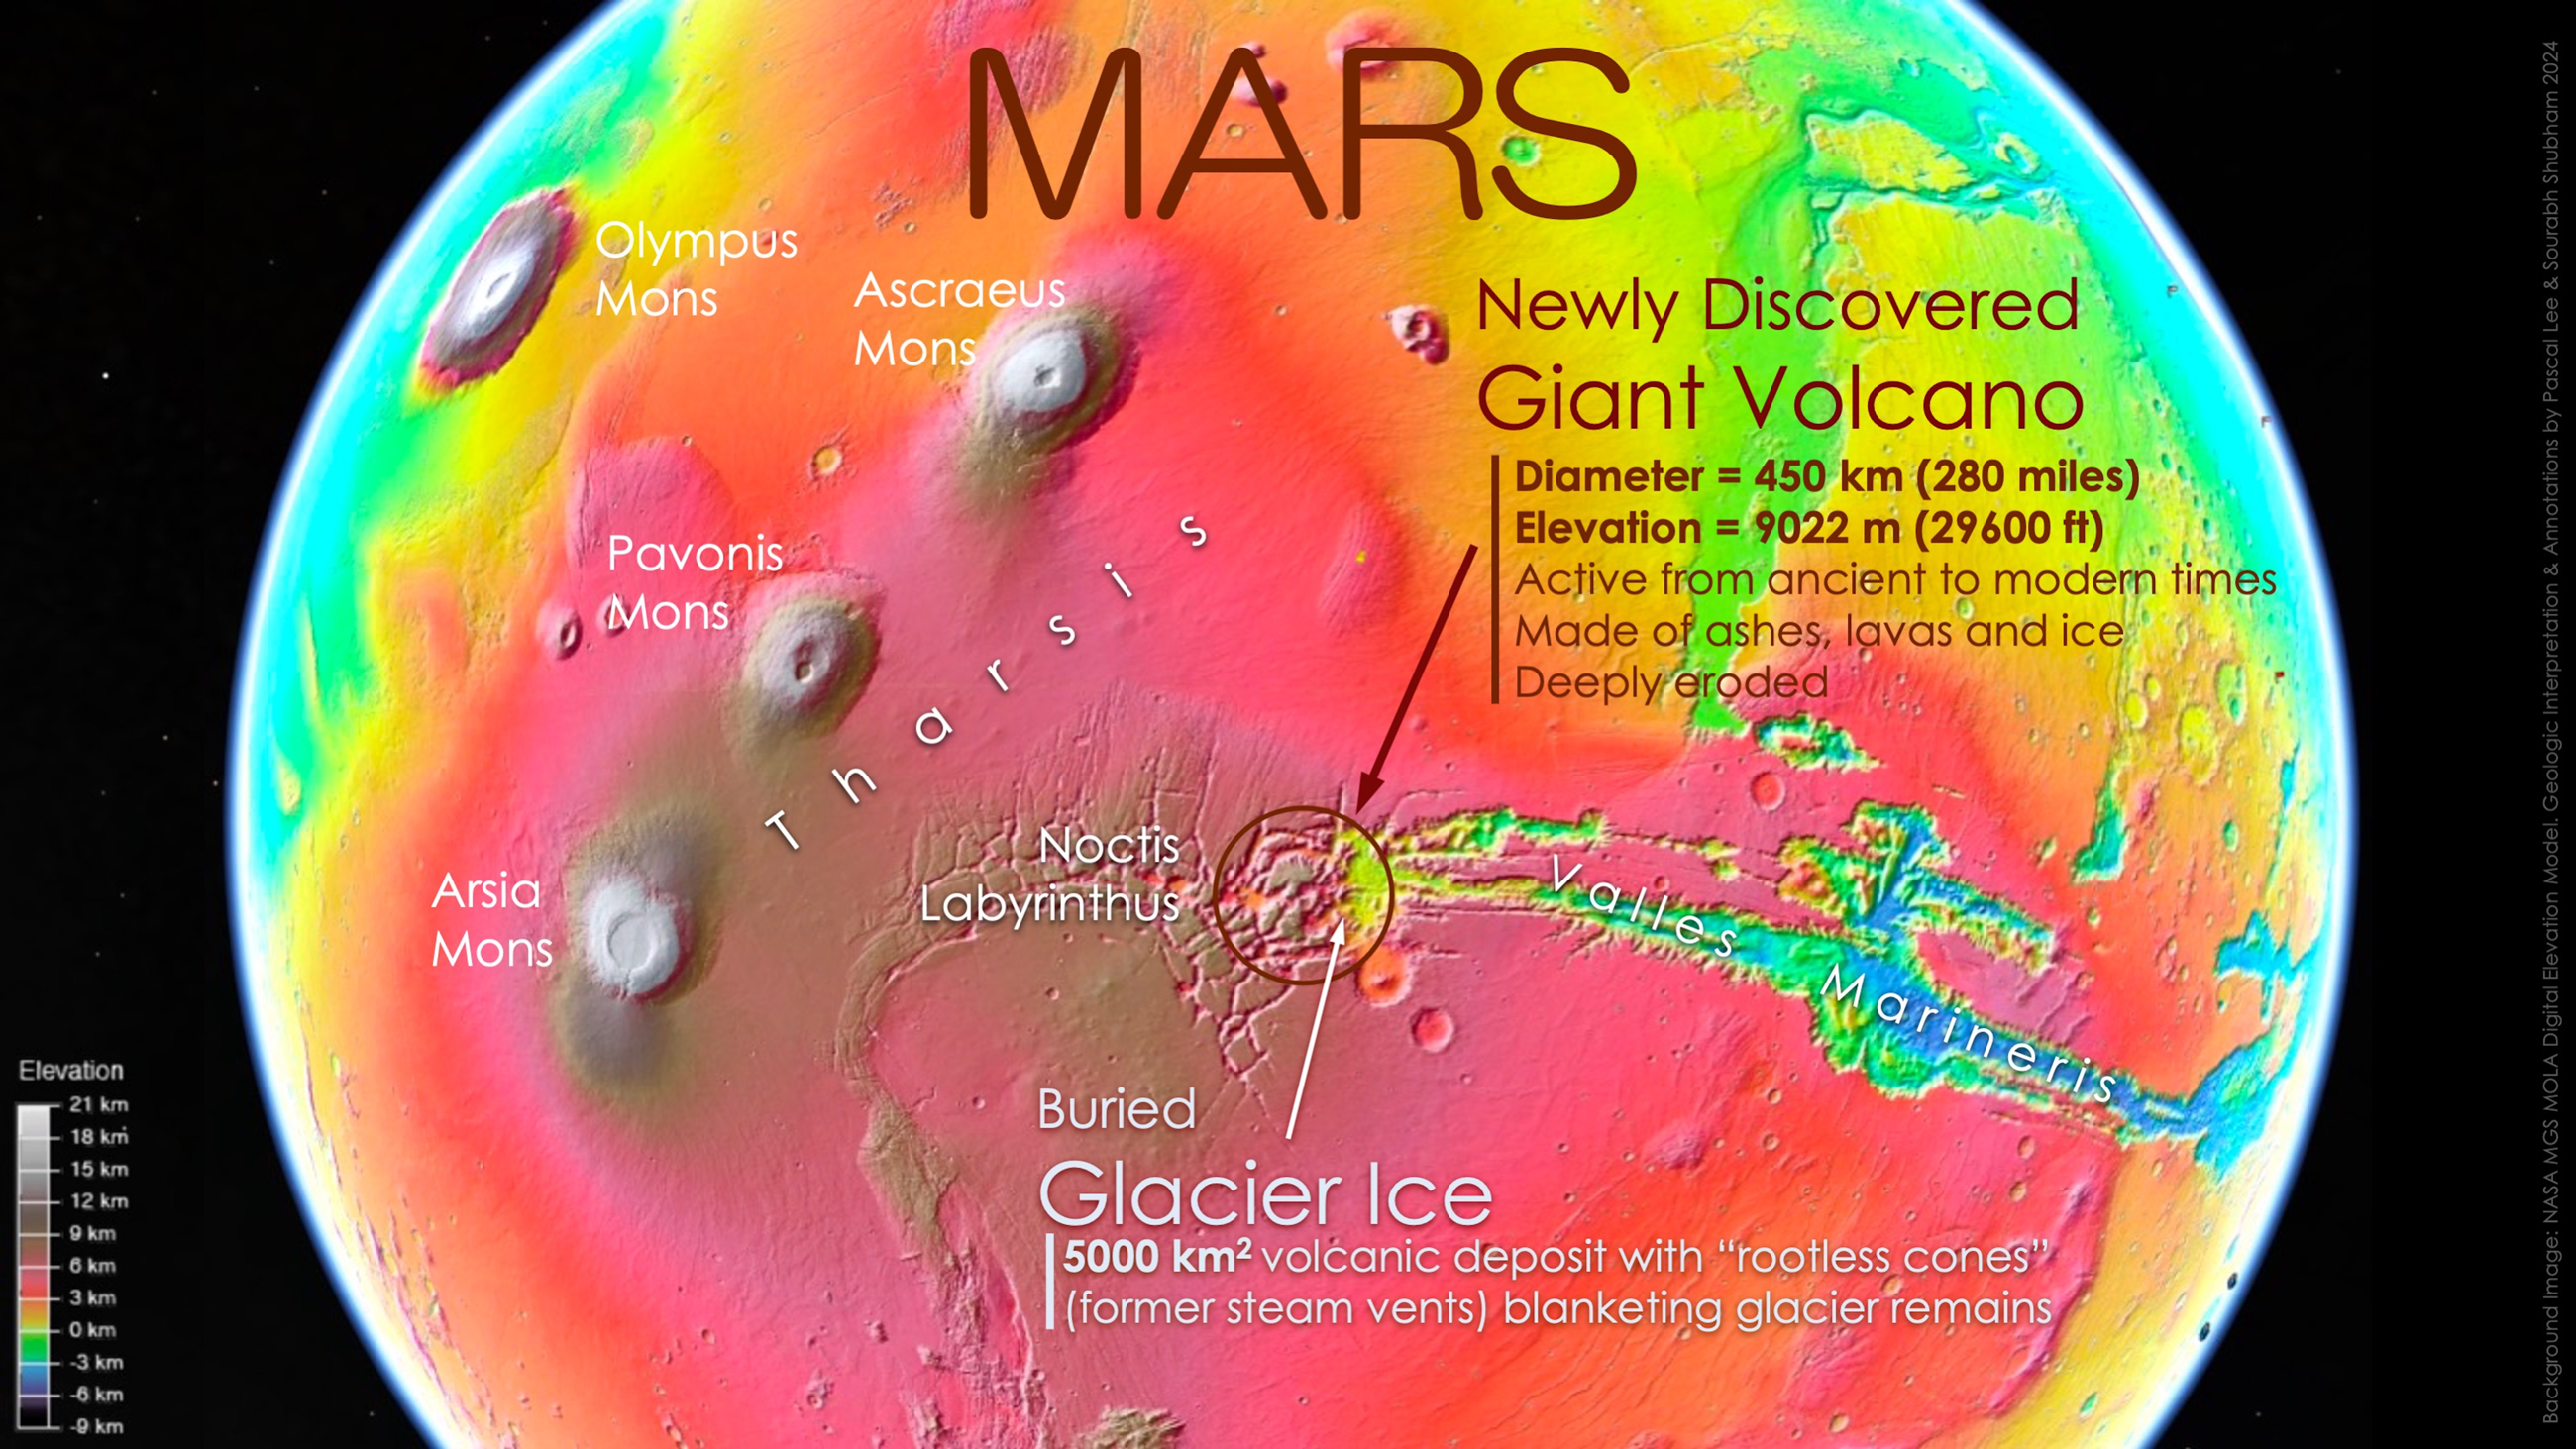 Figure 2. Newly discovered giant volcano is located in the “middle of the action” on Mars. 